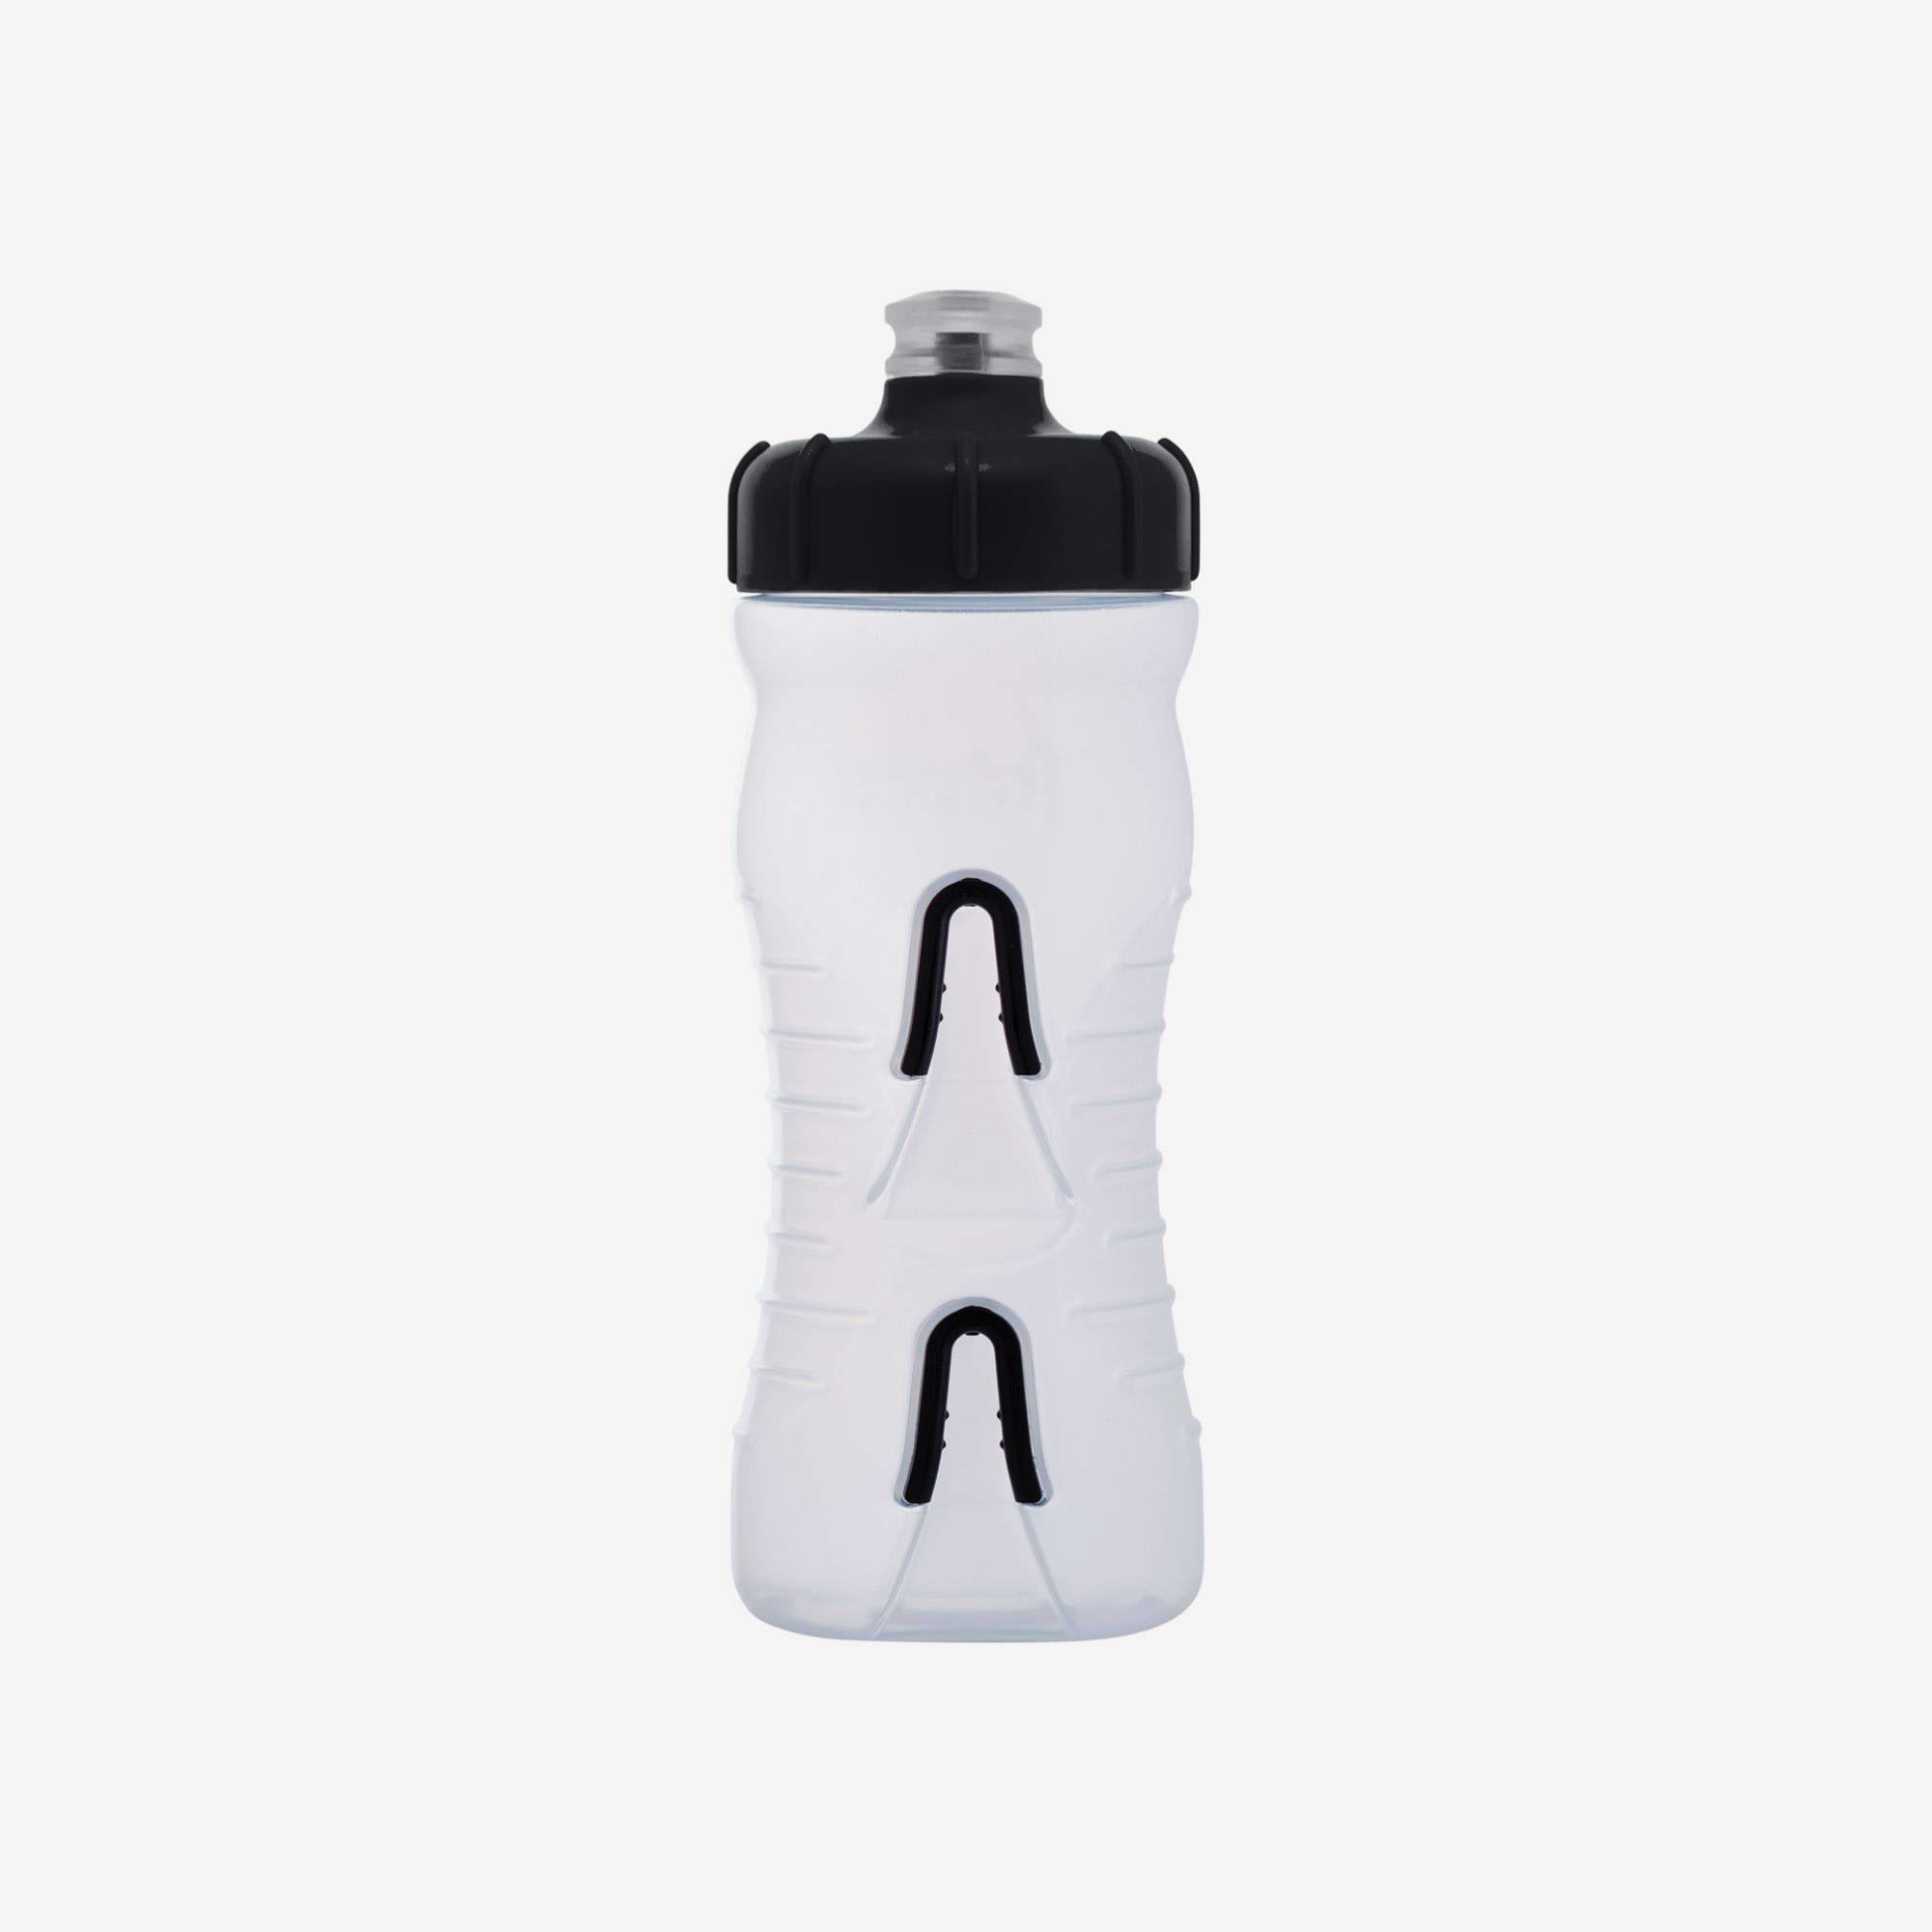 Fabric Fabric Cageless Water Bottle